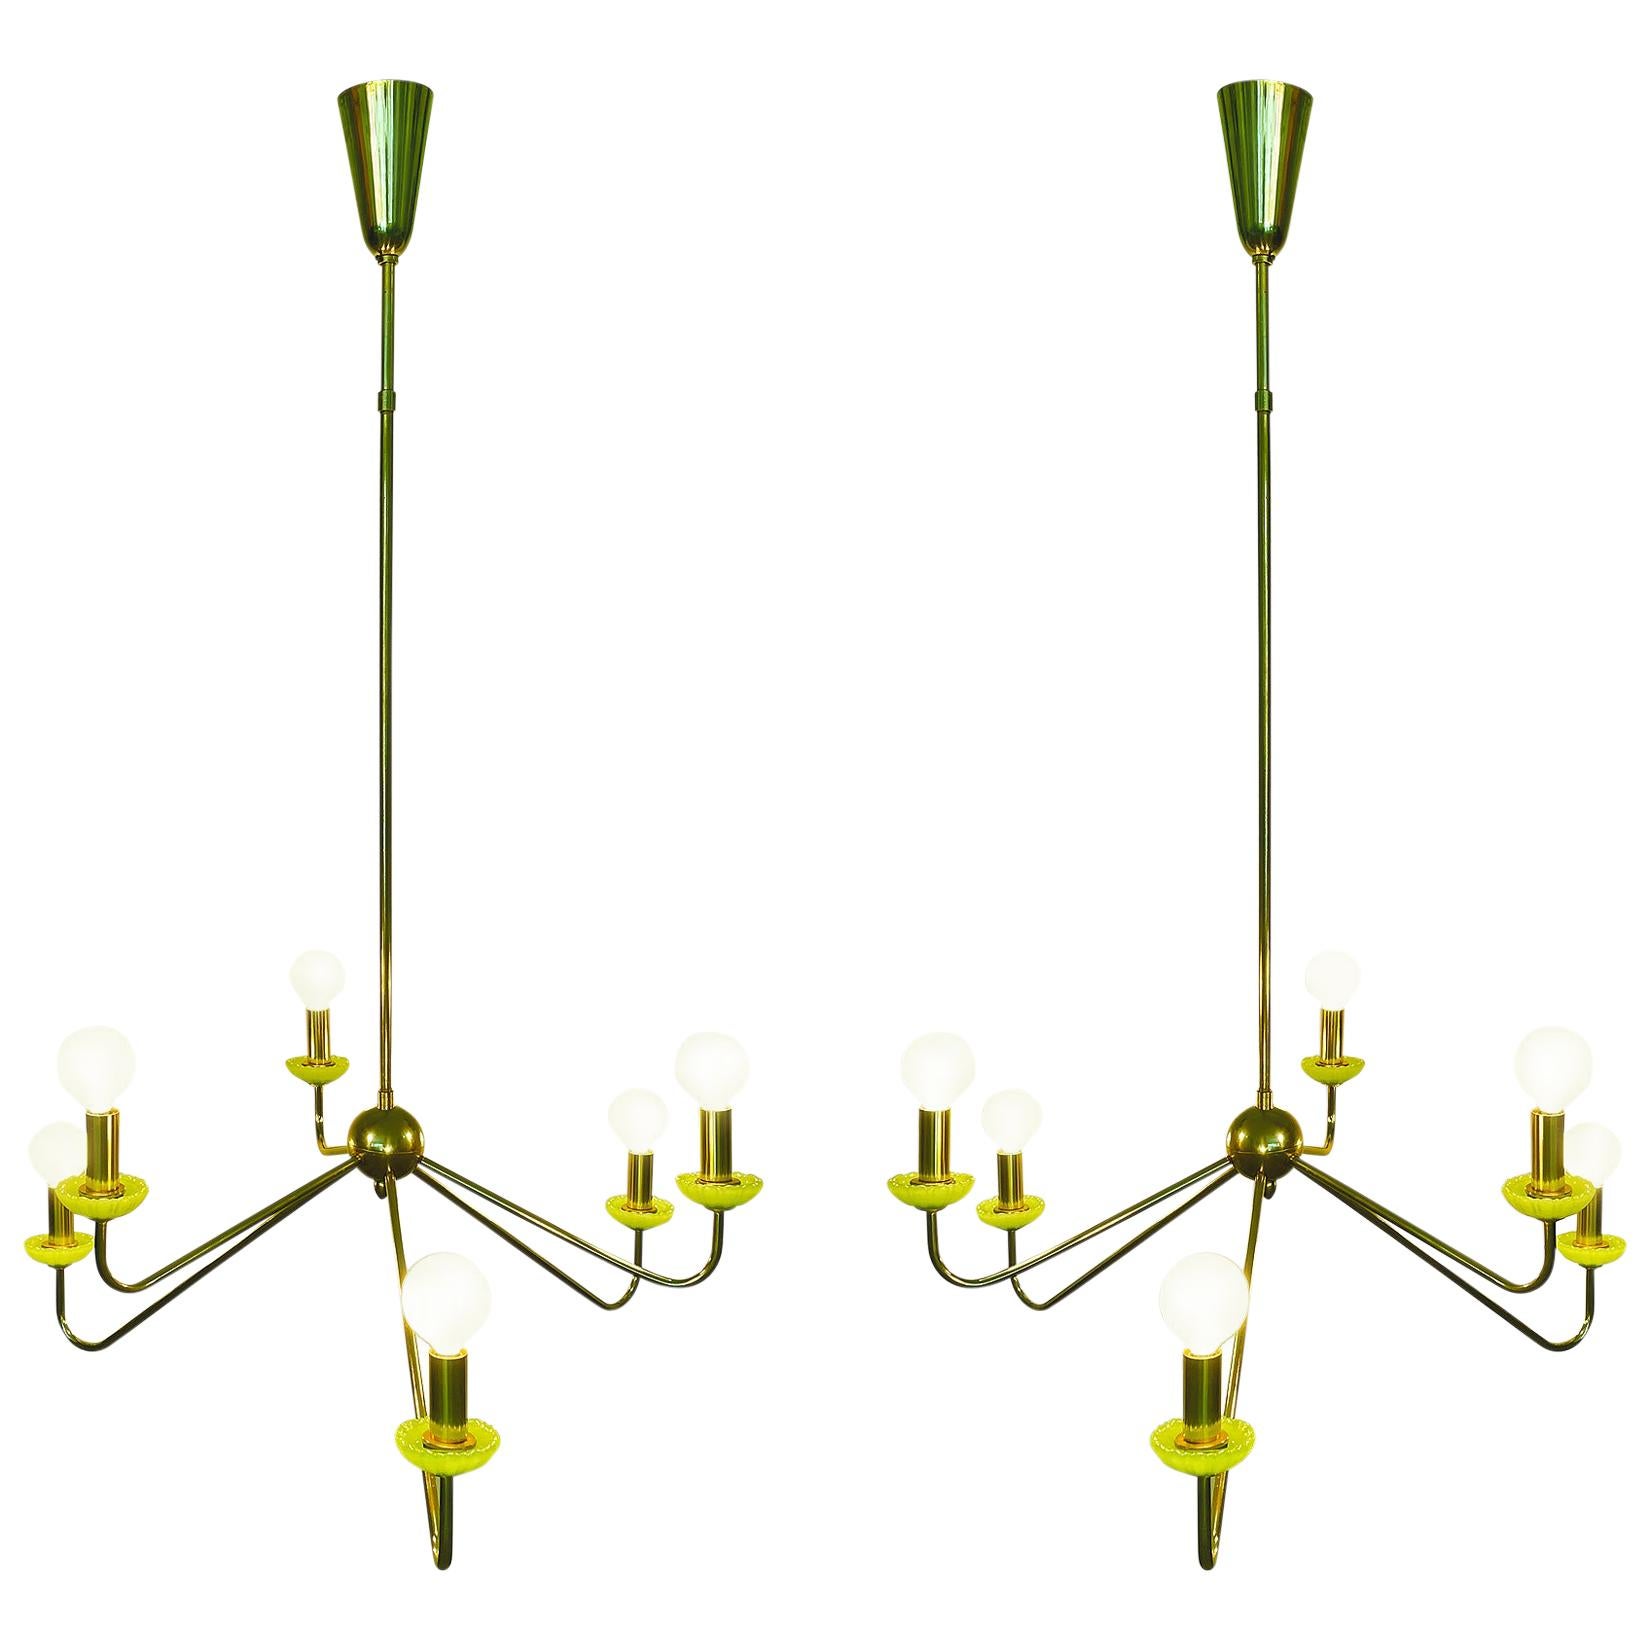 Robert CAILLAT Pair of Brass Chandeliers, circa 1955 For Sale